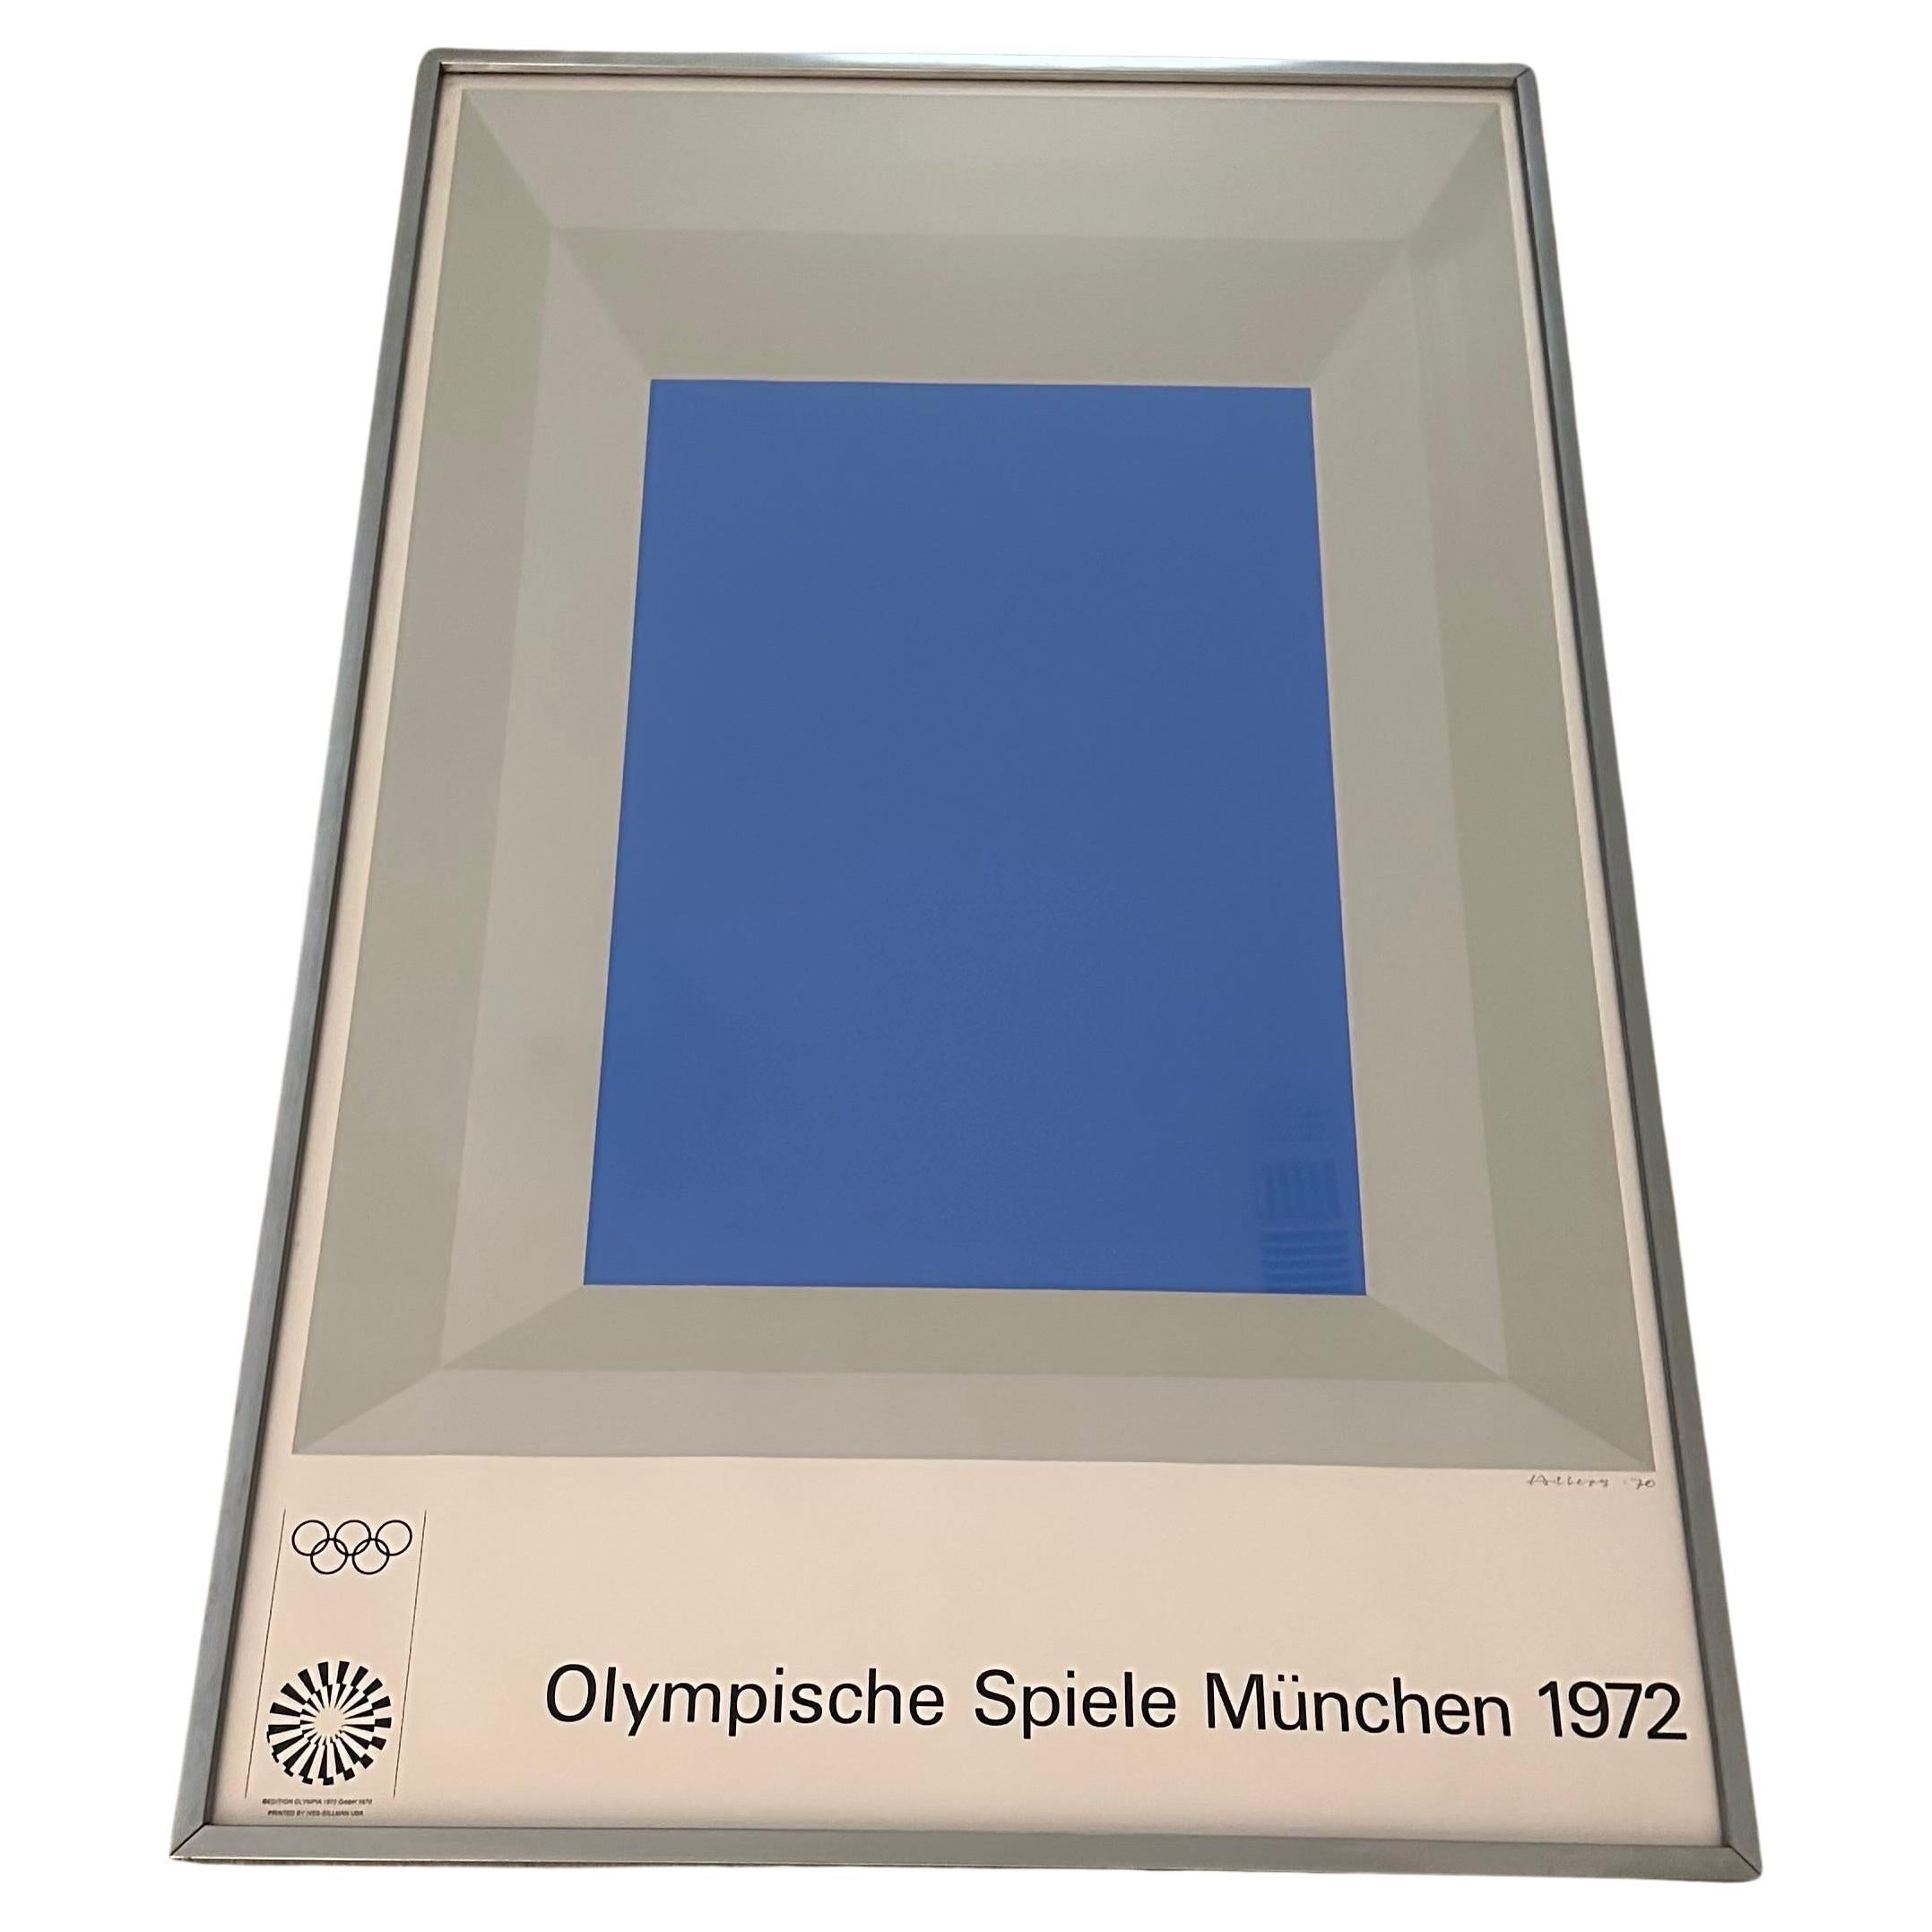 Abstract Serigraph Poster Entitled "1972 Munich Olympics" by Josef Albers For Sale